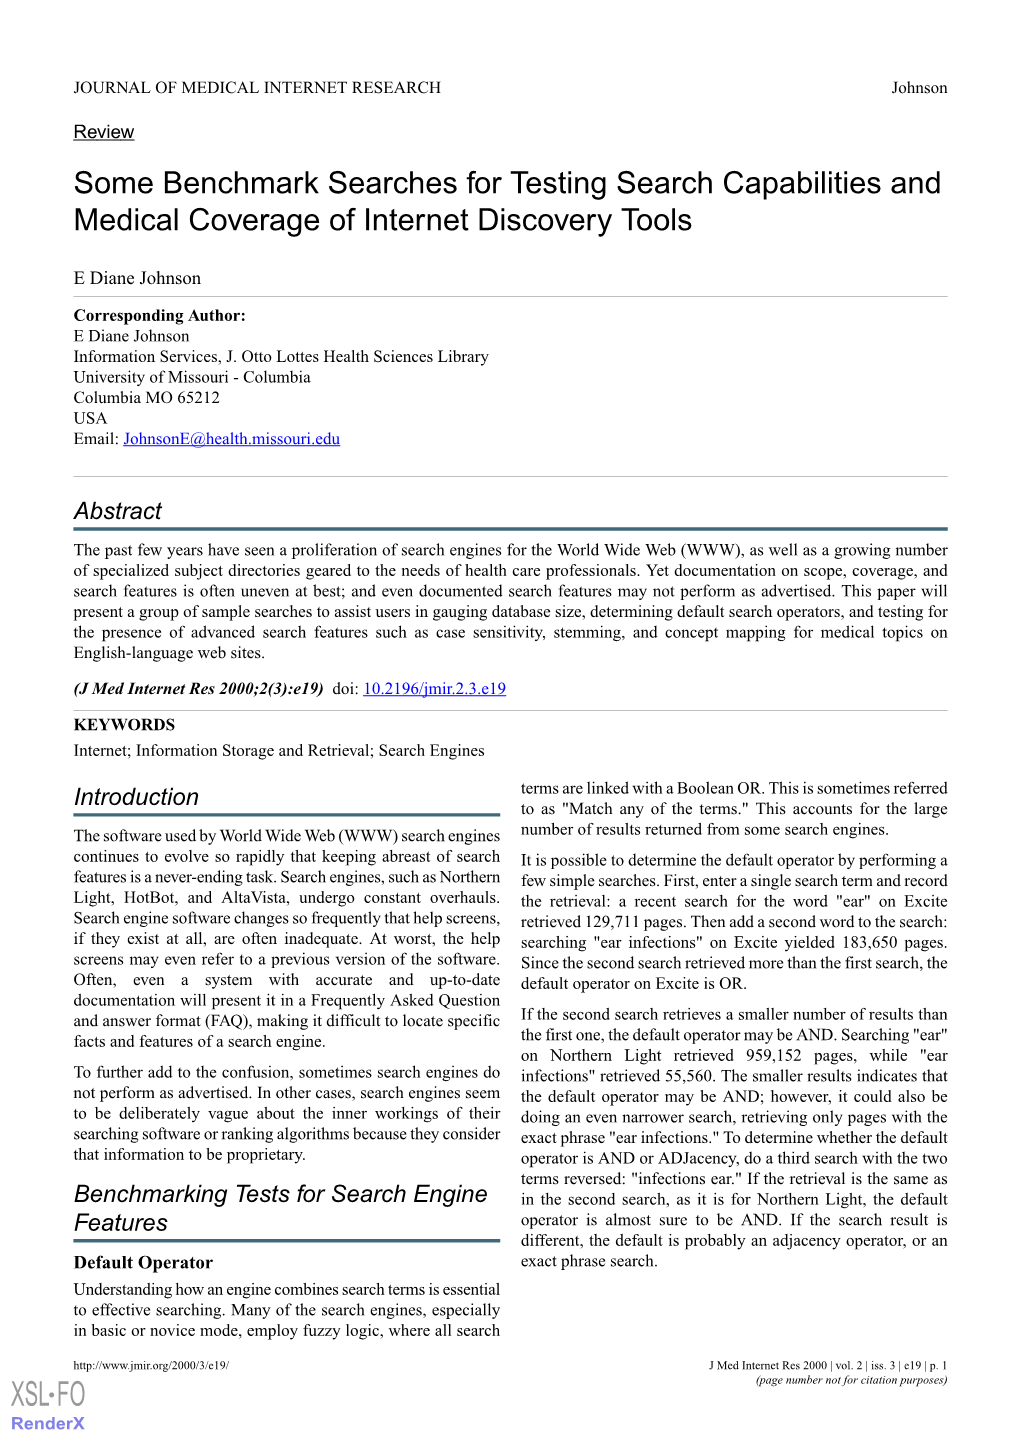 Some Benchmark Searches for Testing Search Capabilities and Medical Coverage of Internet Discovery Tools